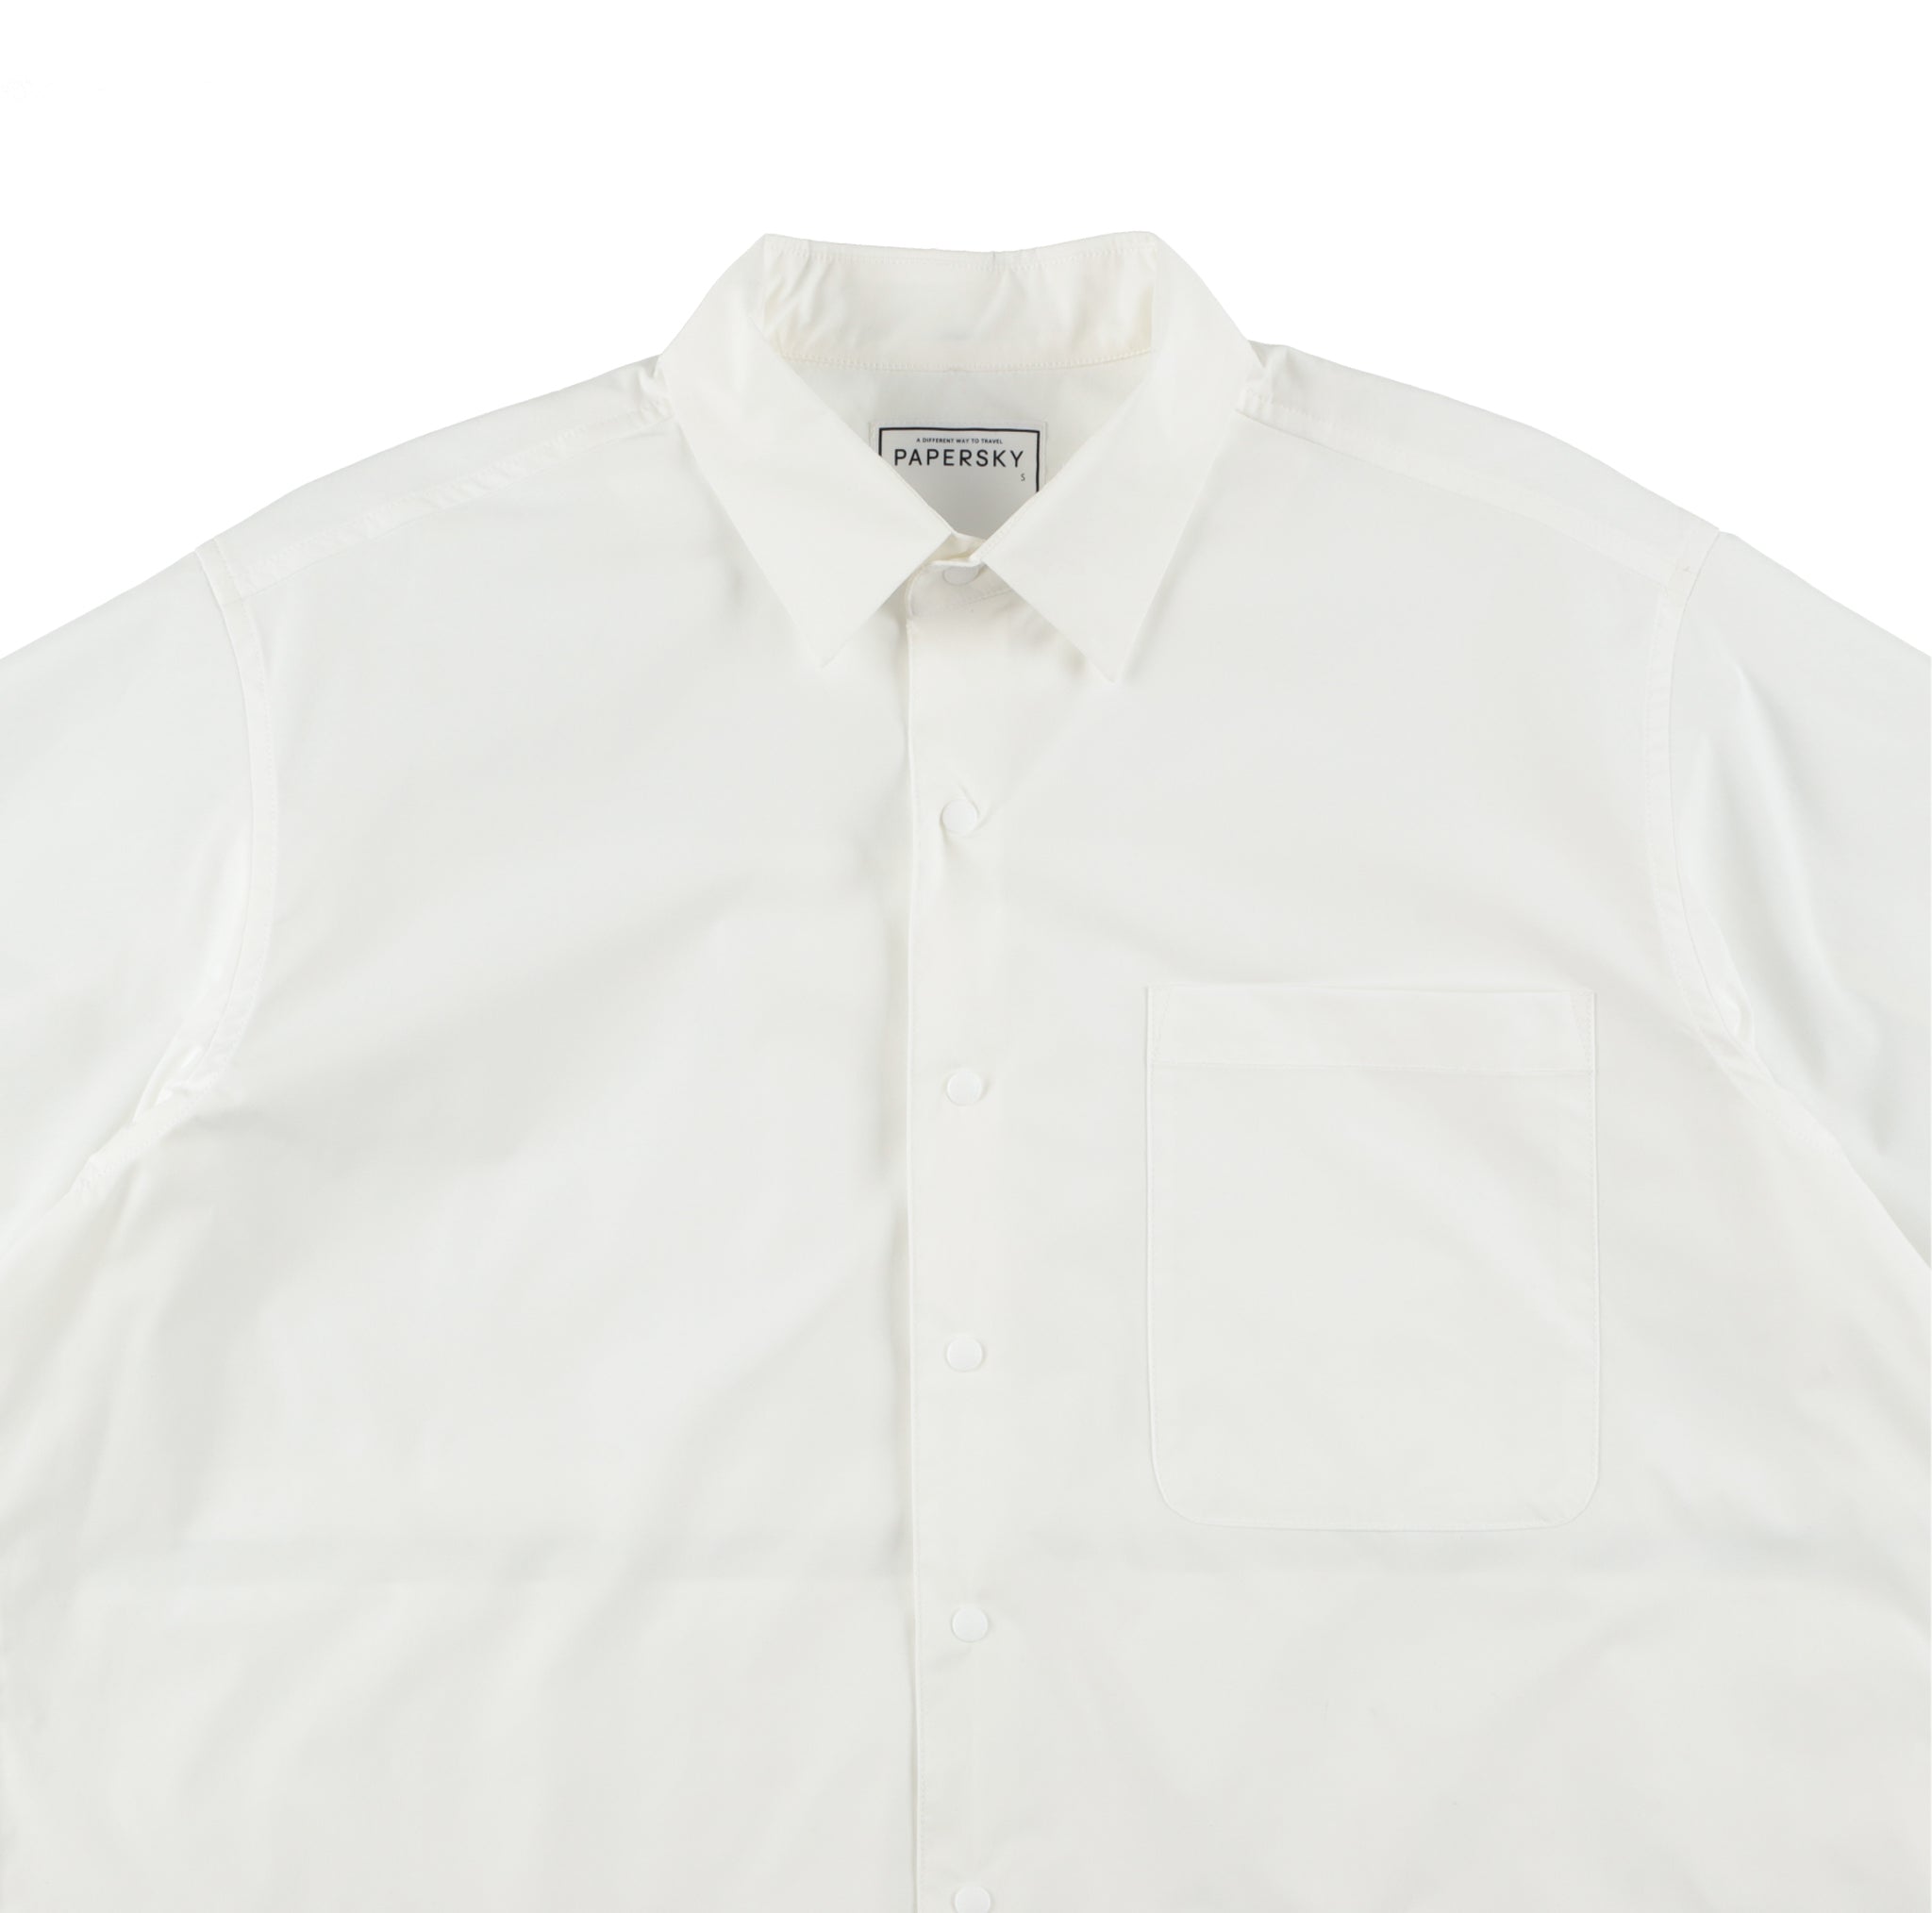 papersky wear cave big half shirts - シャツ